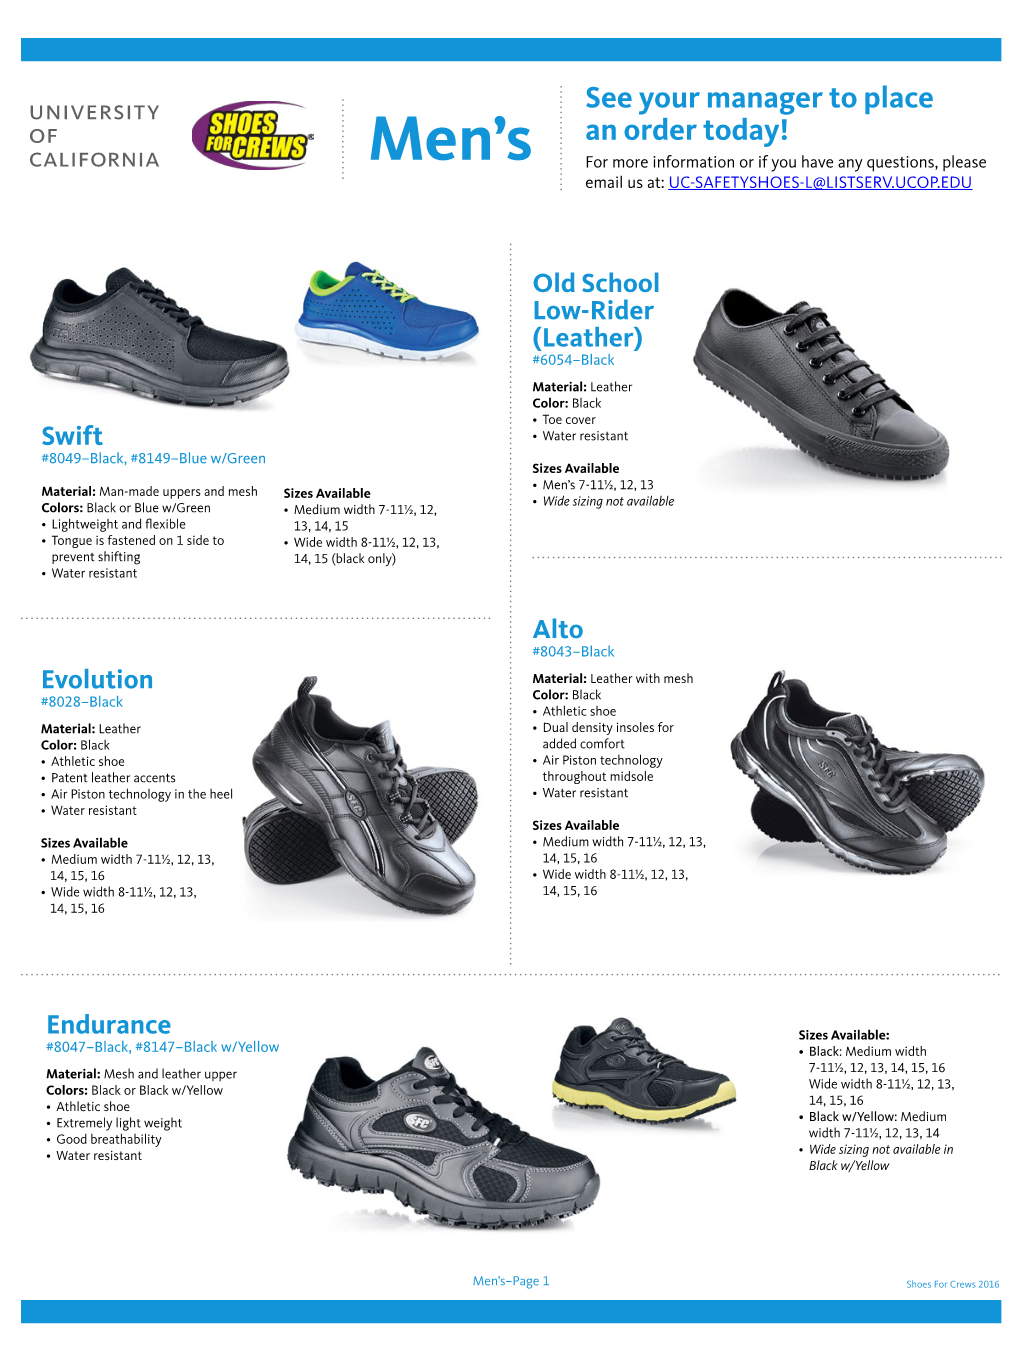 See Your Manager to Place an Order Today! Men’S for More Information Or If You Have Any Questions, Please Email Us At: UC-SAFETYSHOES-L@LISTSERV.UCOP.EDU